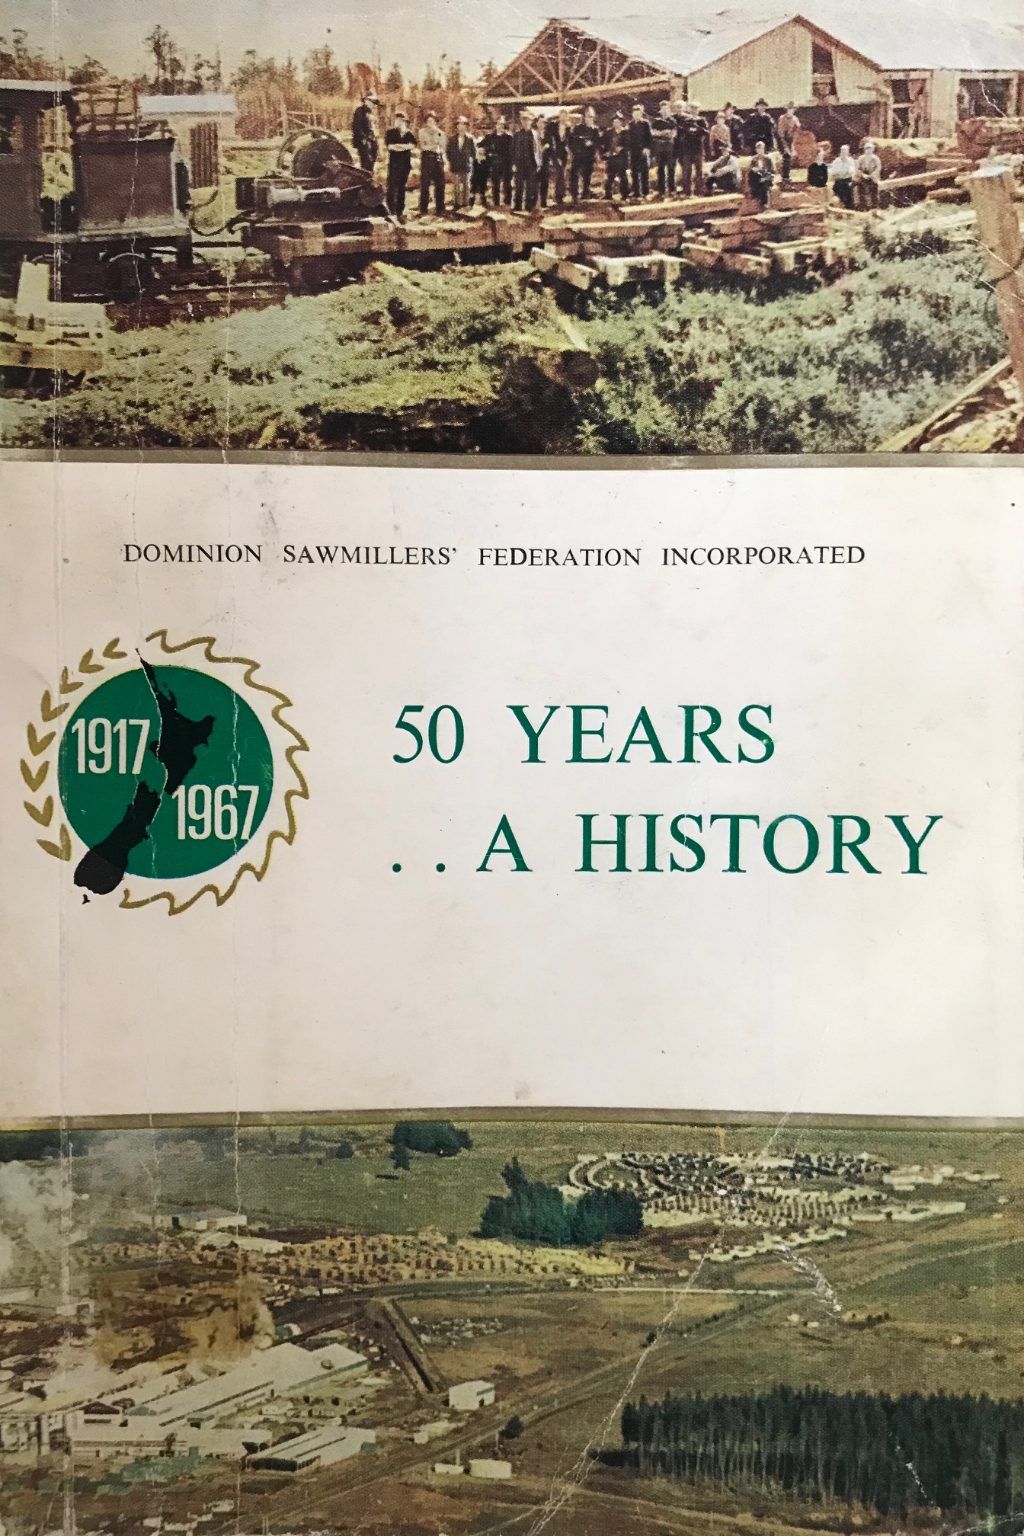 DOMINION SAWMILLERS FEDERATION: 50 Years, A History 1917 - 1967